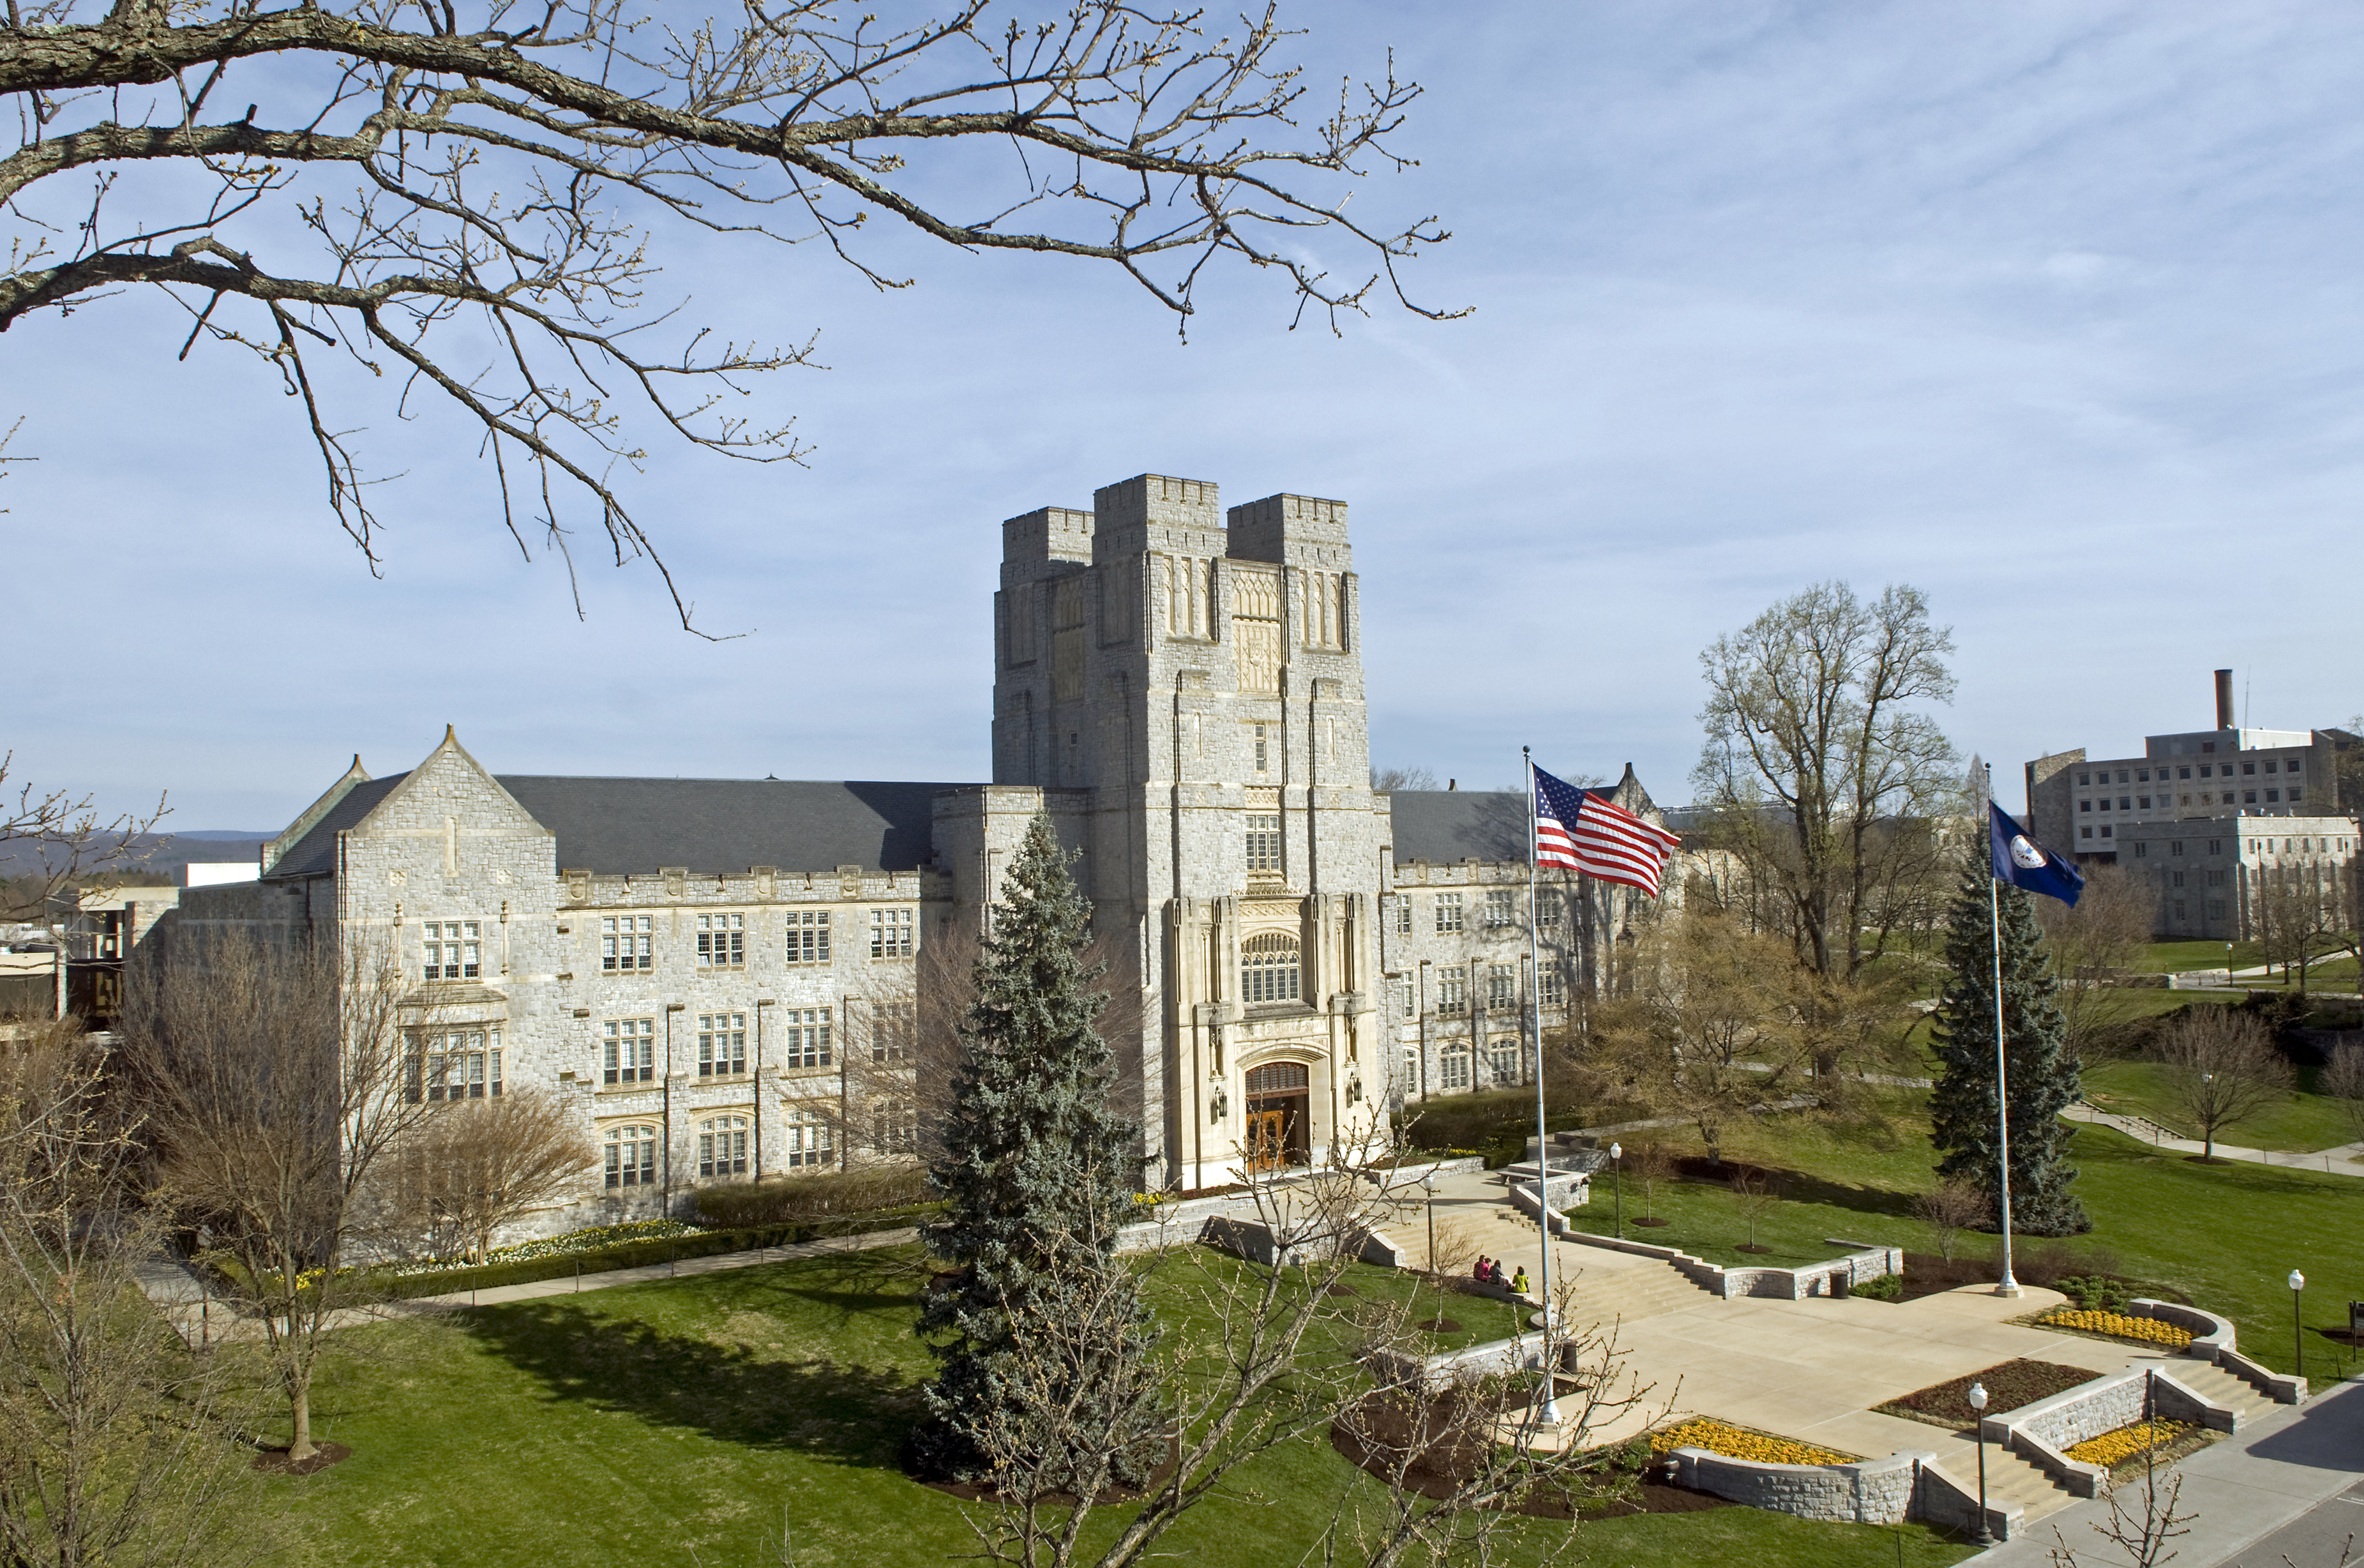 In the Virginia's Favorite Architecture public poll, Burruss Hall was chosen 3rd, Lumenhaus 4th, War Memorial Chapel and Pylons was 6th, and Moss Arts Center was 8th.